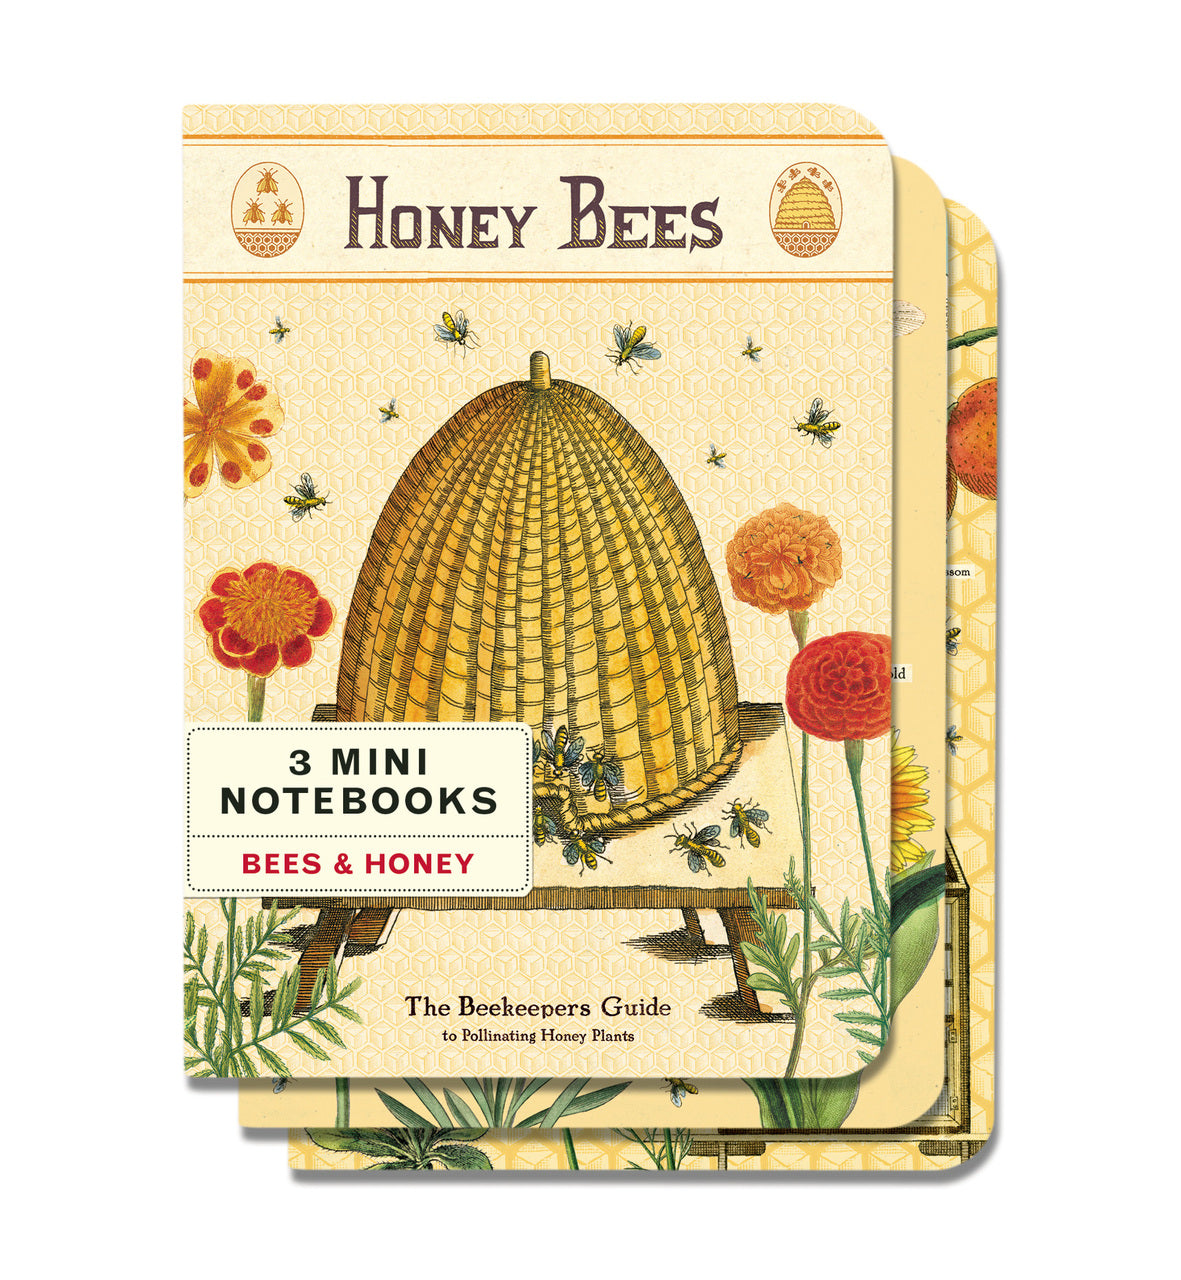 Bees & Honey Mini Notebook set comes with three high quality notebooks featuring bright and colorful reproductions of vintage images of bees, hives, flowers, and fruits.